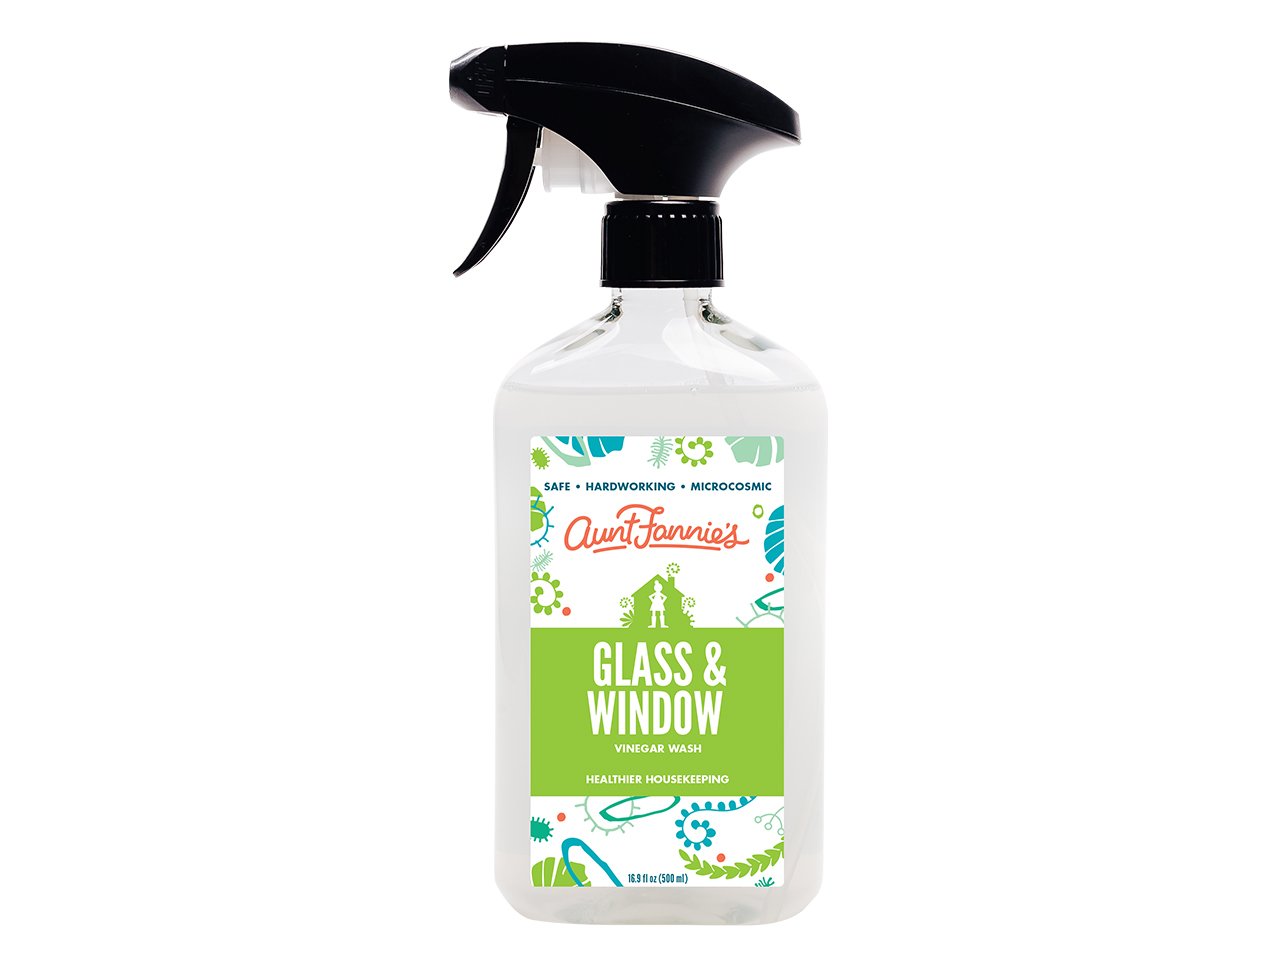 Eco-friendly cleaning products, Aunt Fannie's Glass & Window spray bottle